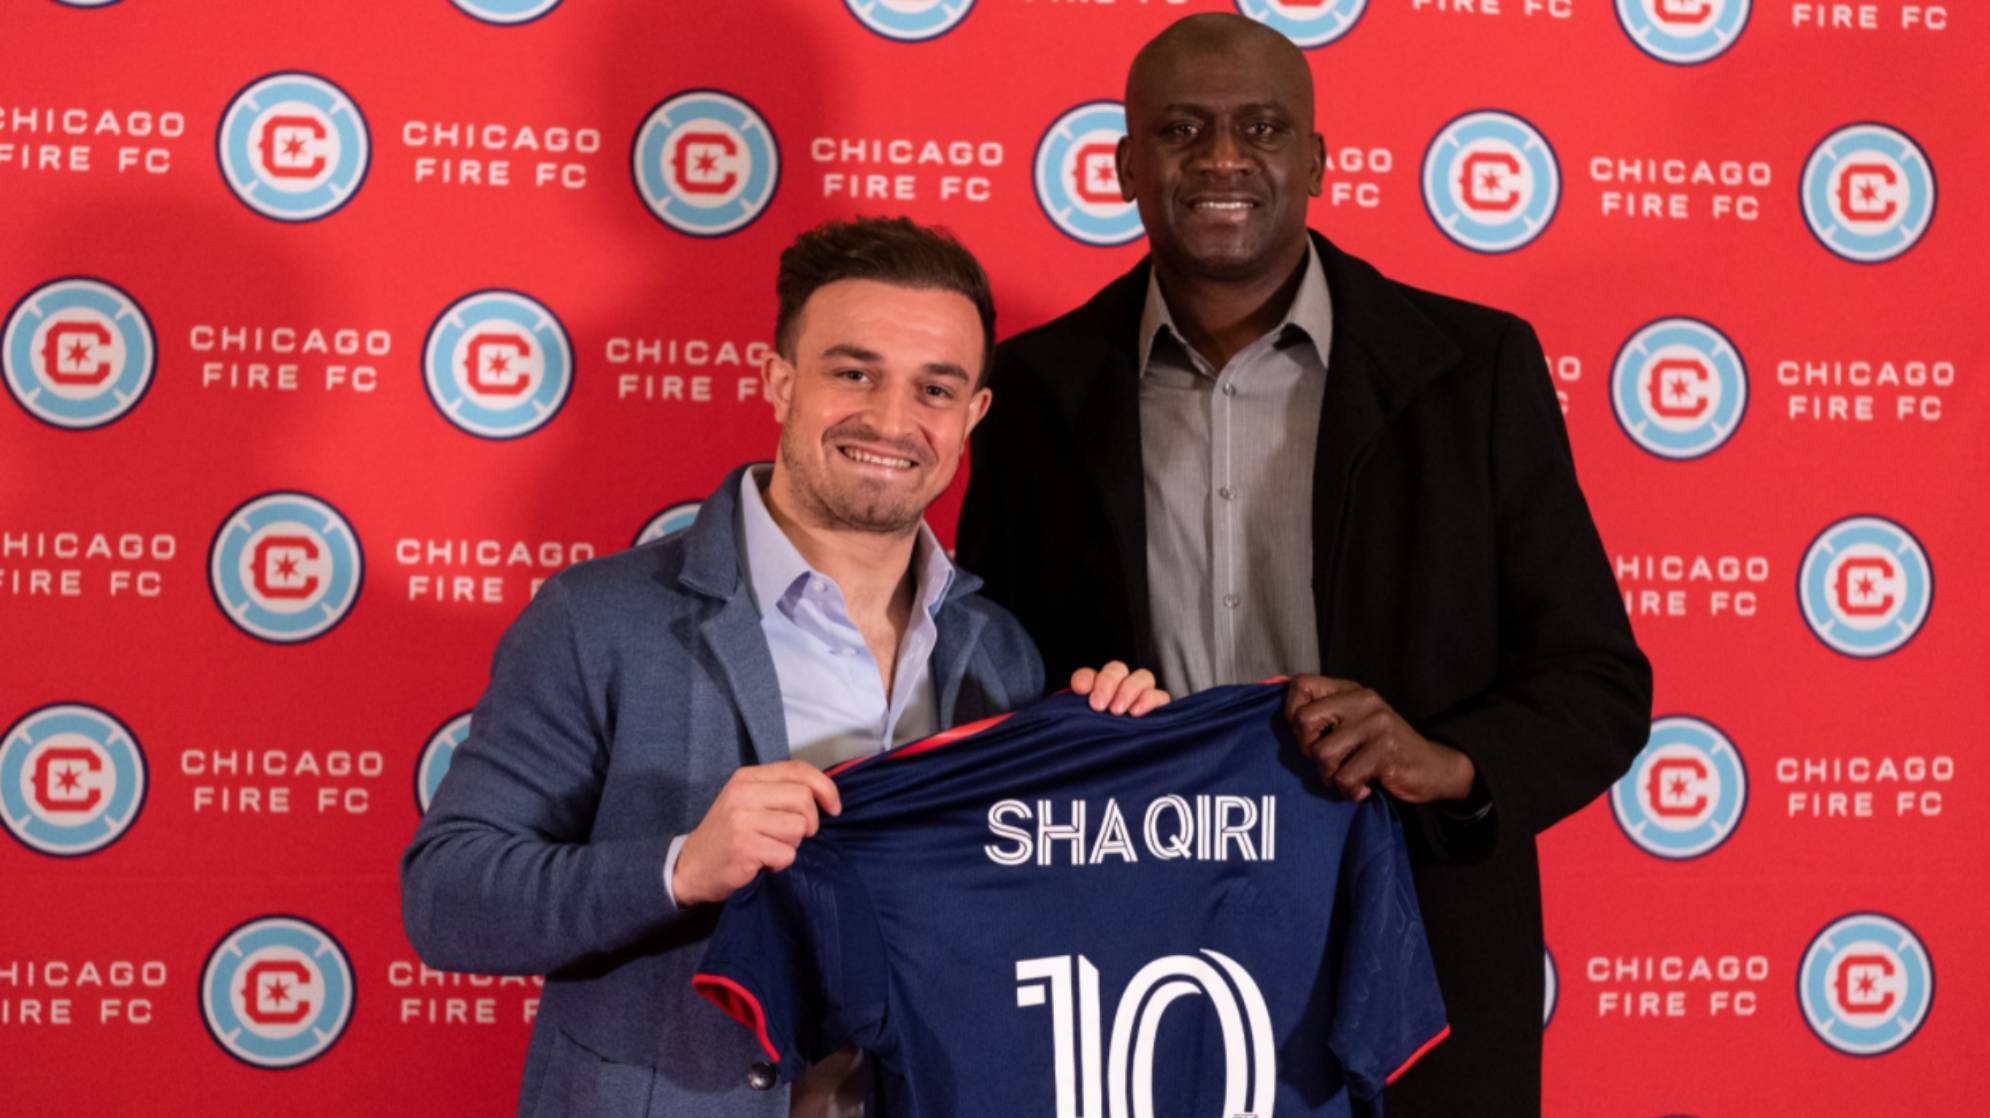 Shaqiri aiming to "bring the glory back" to Chicago Fire after joining MLS